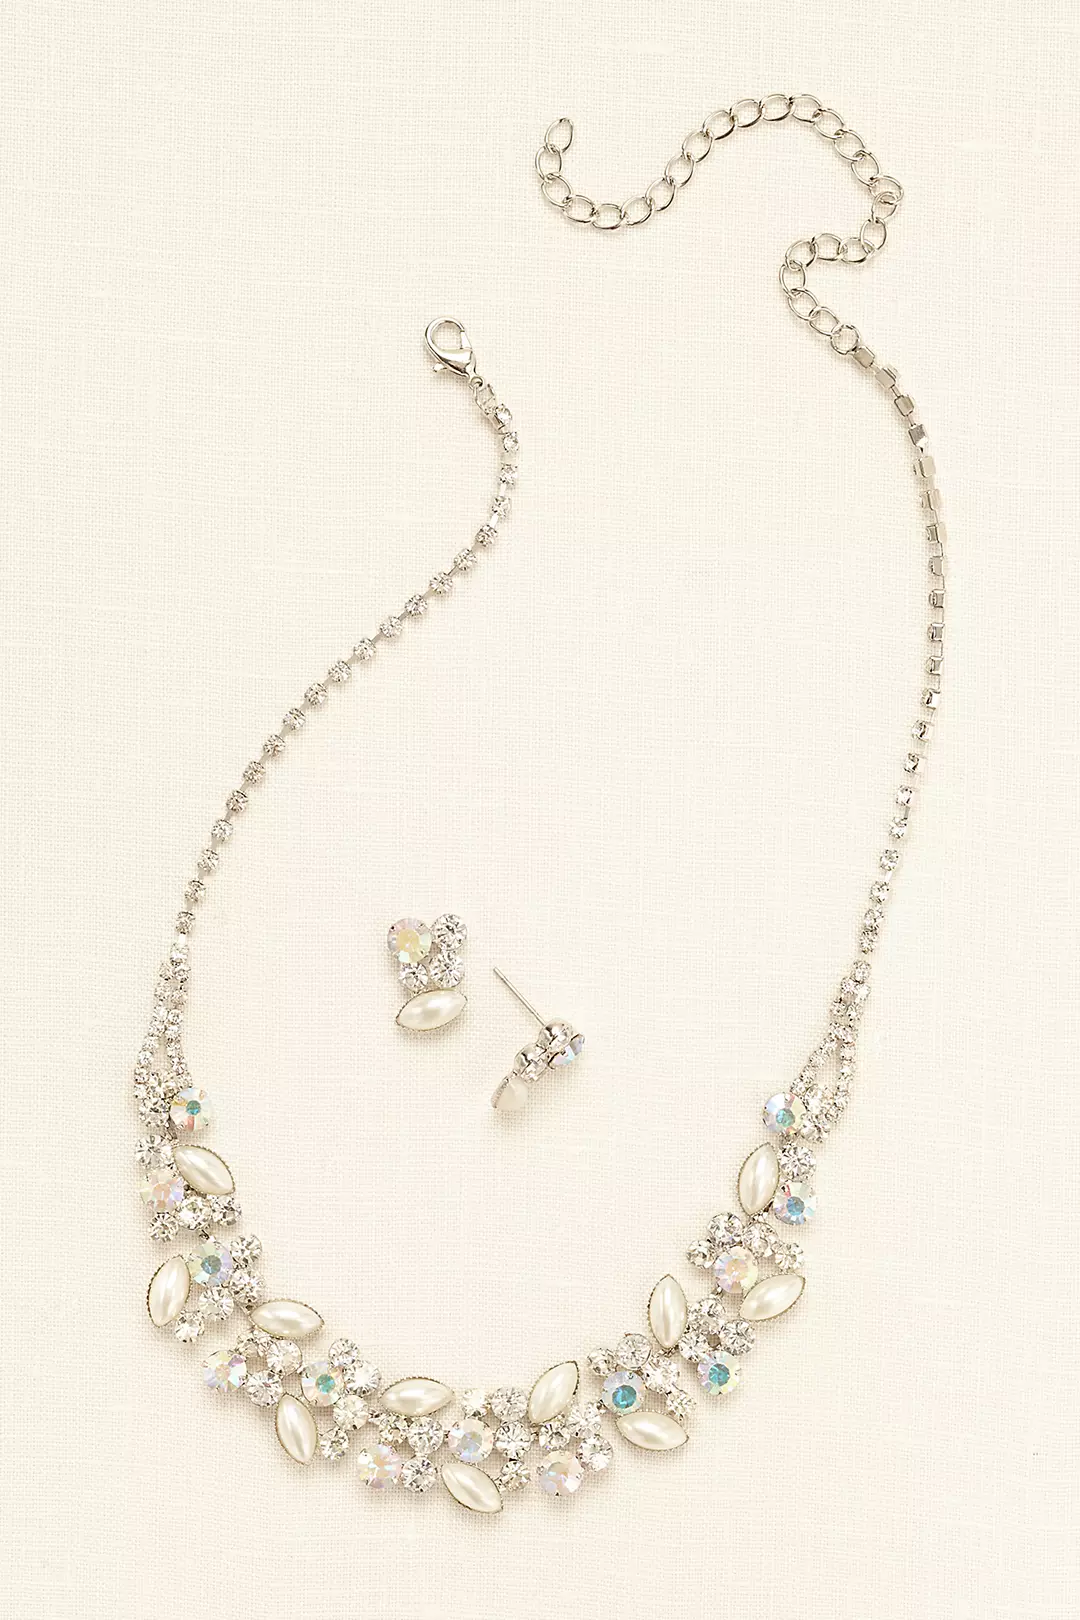 Pearl Crystal and Stone Necklace and Earring Set Image